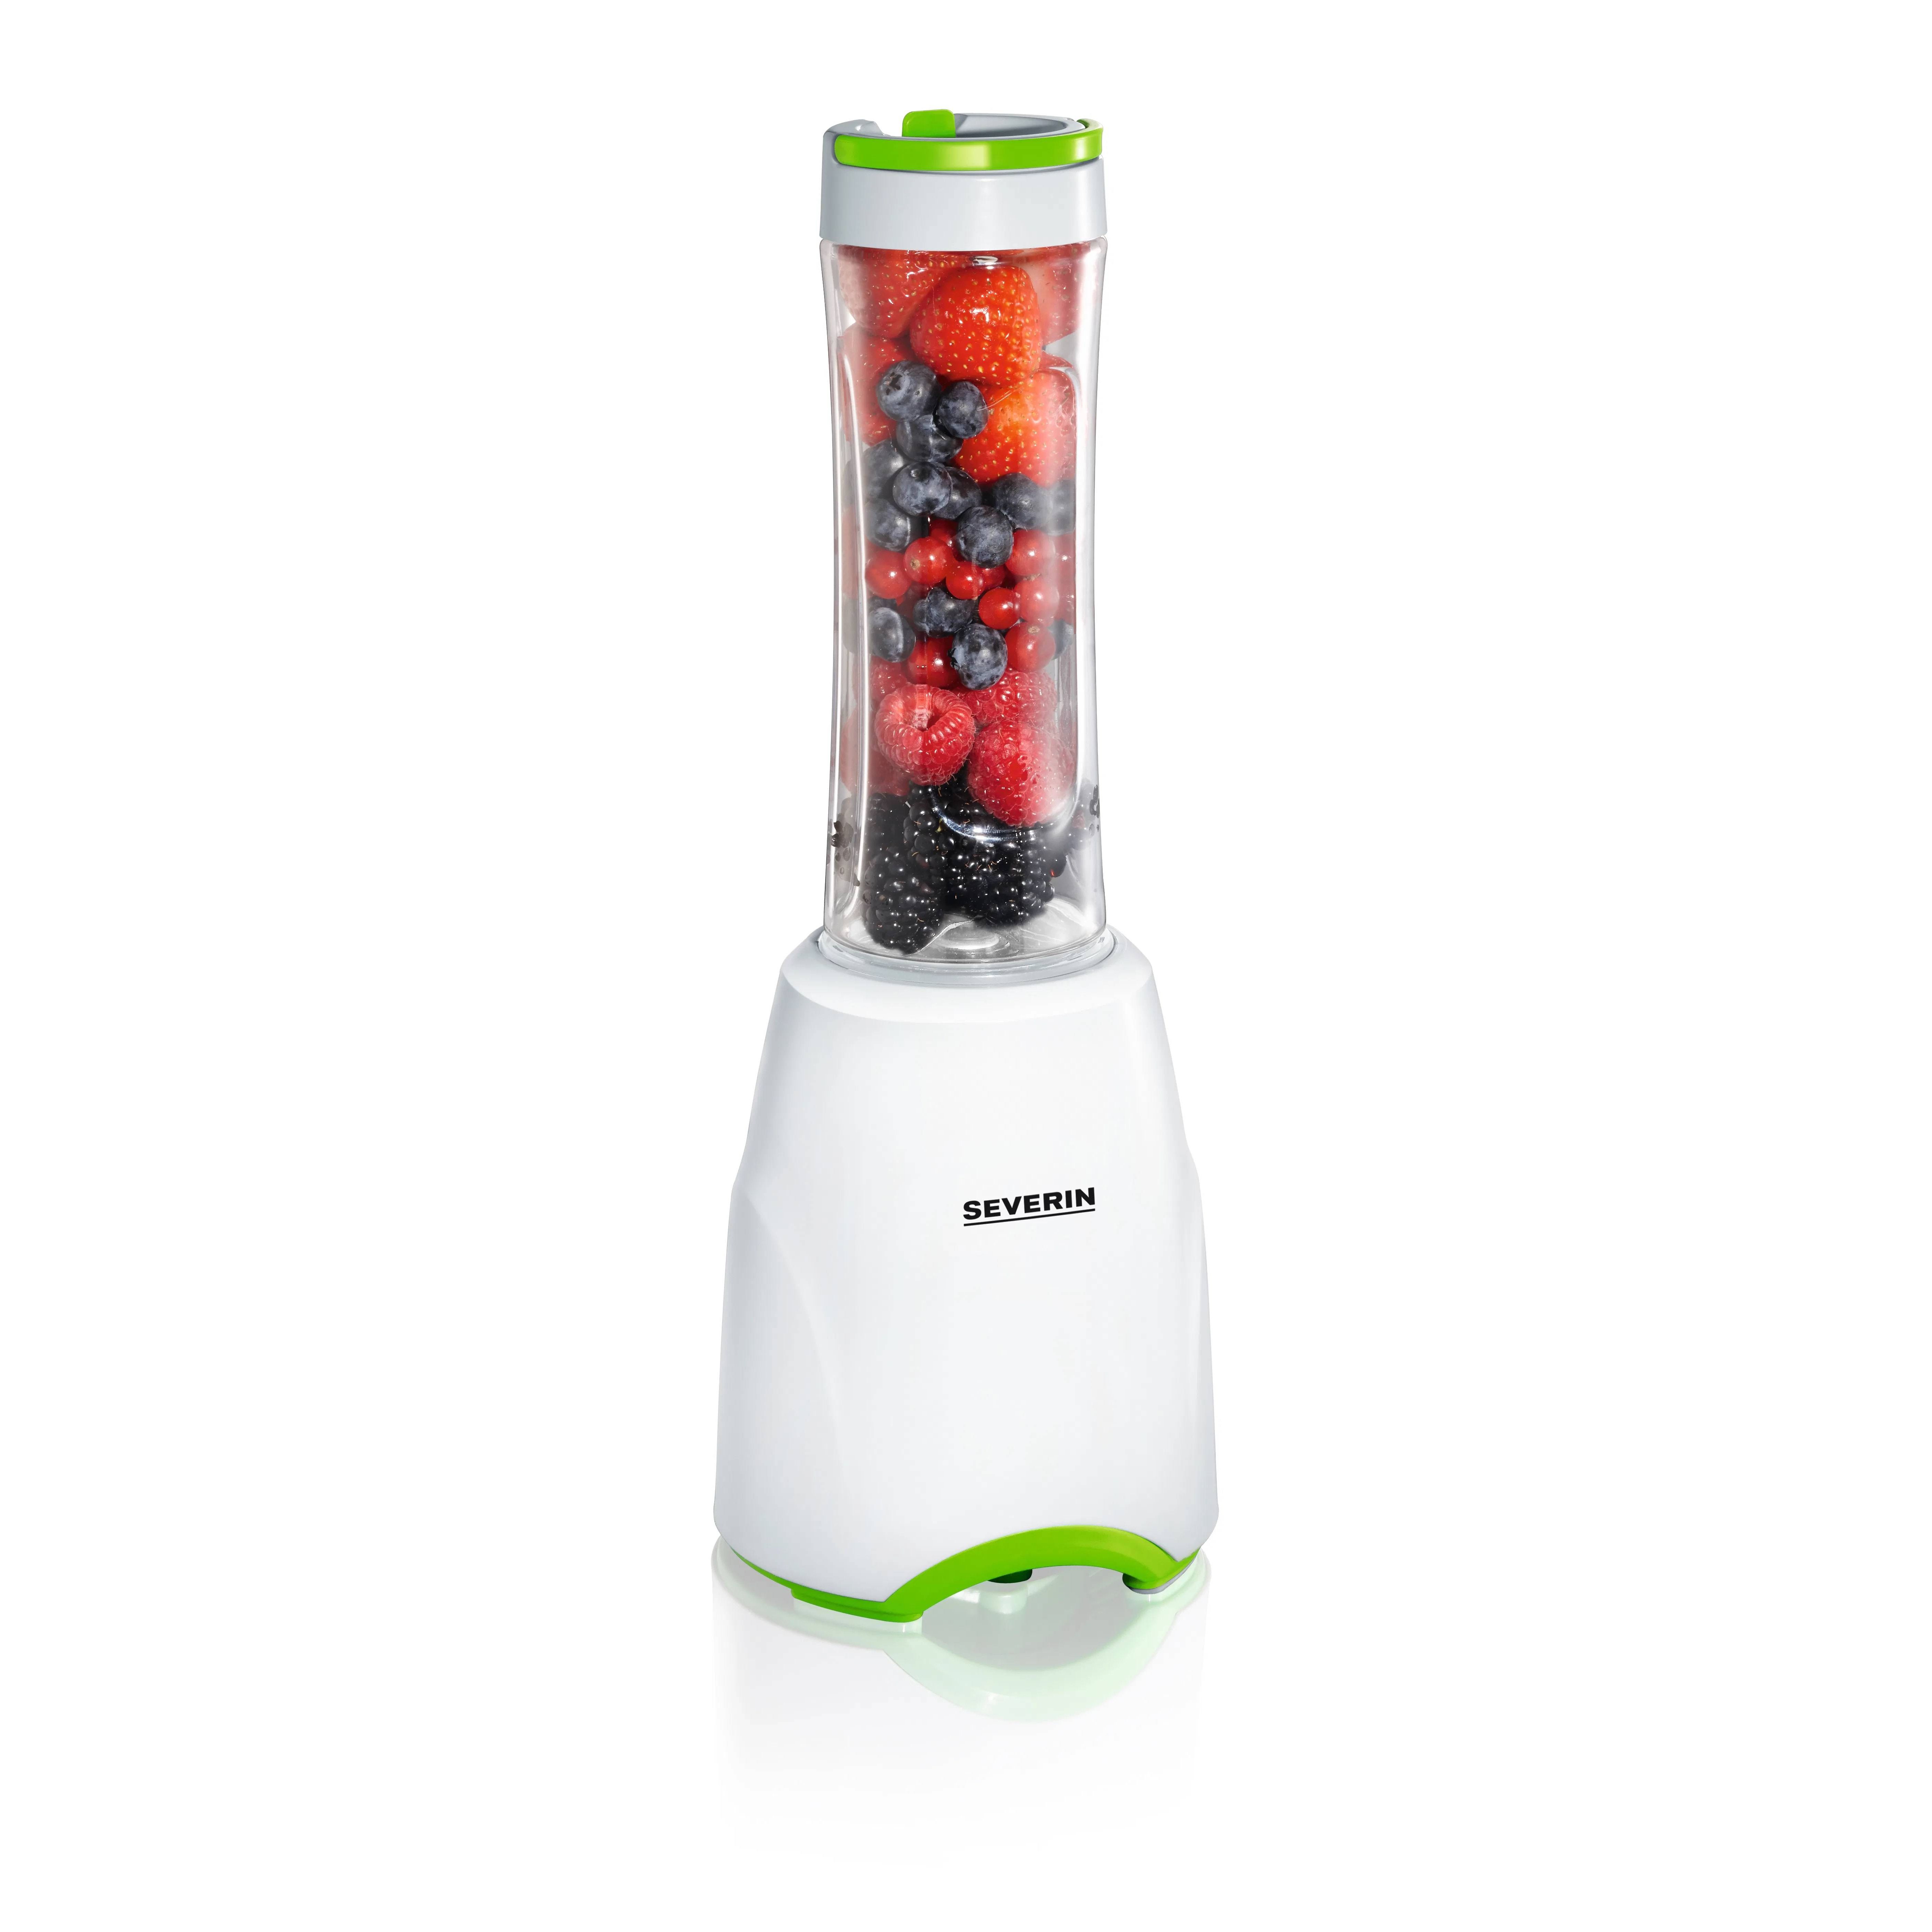 Small Appliances Kitchen :: Blenders :: SEVERIN SMOOTHIE MIX & GO, BLENDER & DRINK BOTTLE, ALL IN ONE, 2DETACHABLE & DISHWASHARE SAFE, DRINK BOTTLES,1SPEED SETTING WITH ADD.PULSE, S/SBLADES, SAFETY CUT-OUT,